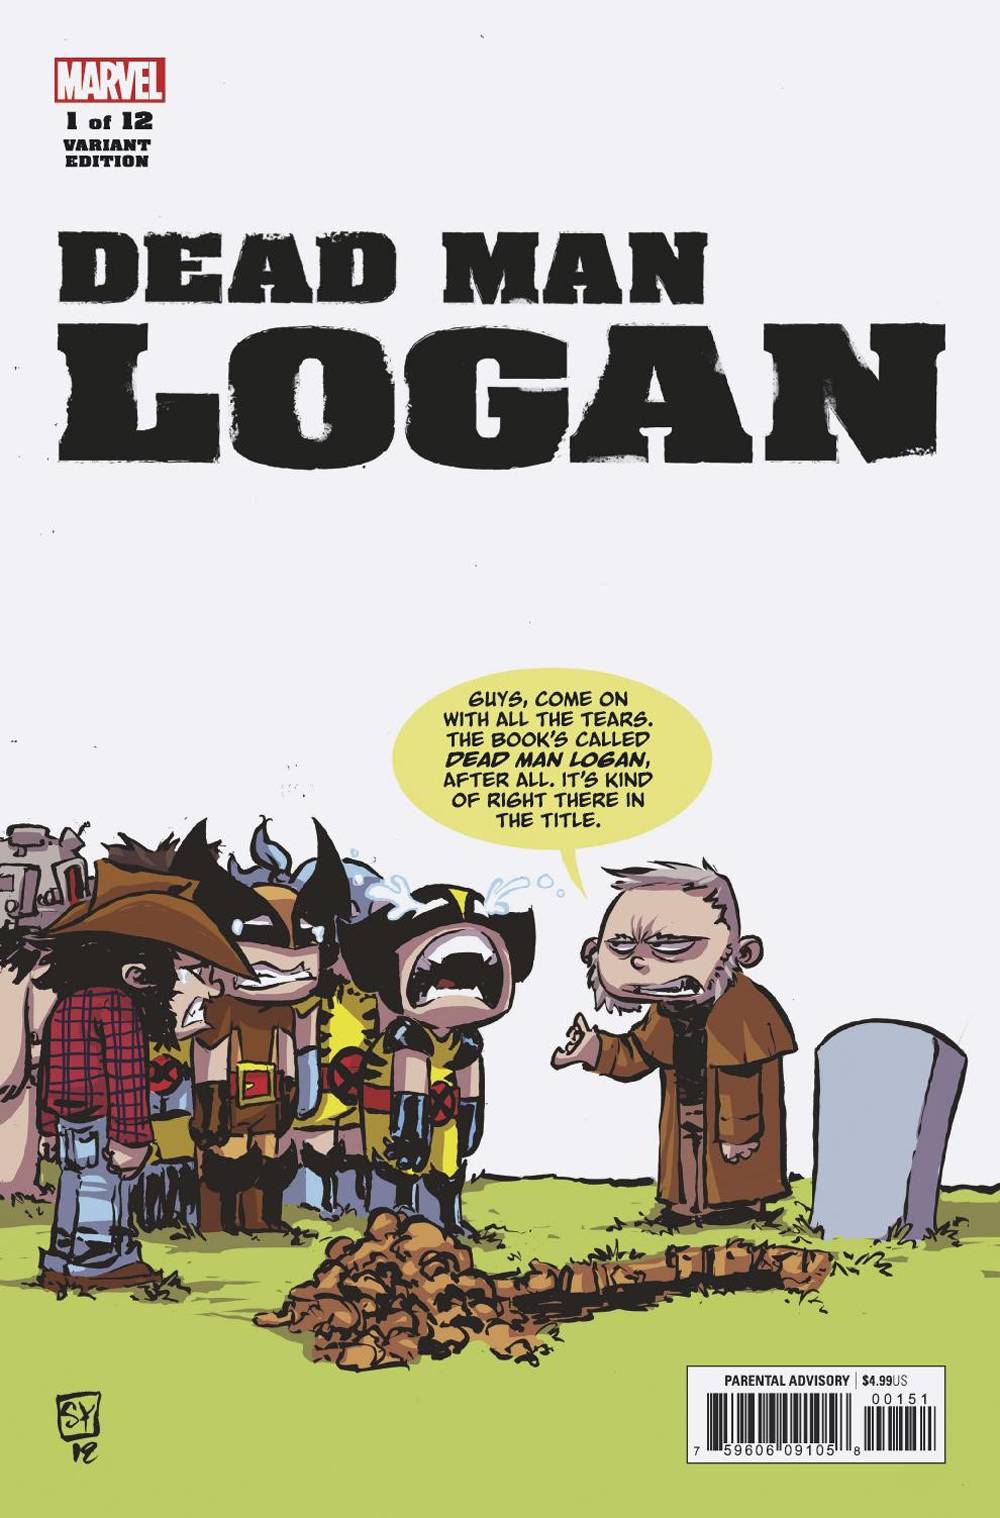 Dead Man Logan #1 (of 12) Variant Edition (Young) [2018]